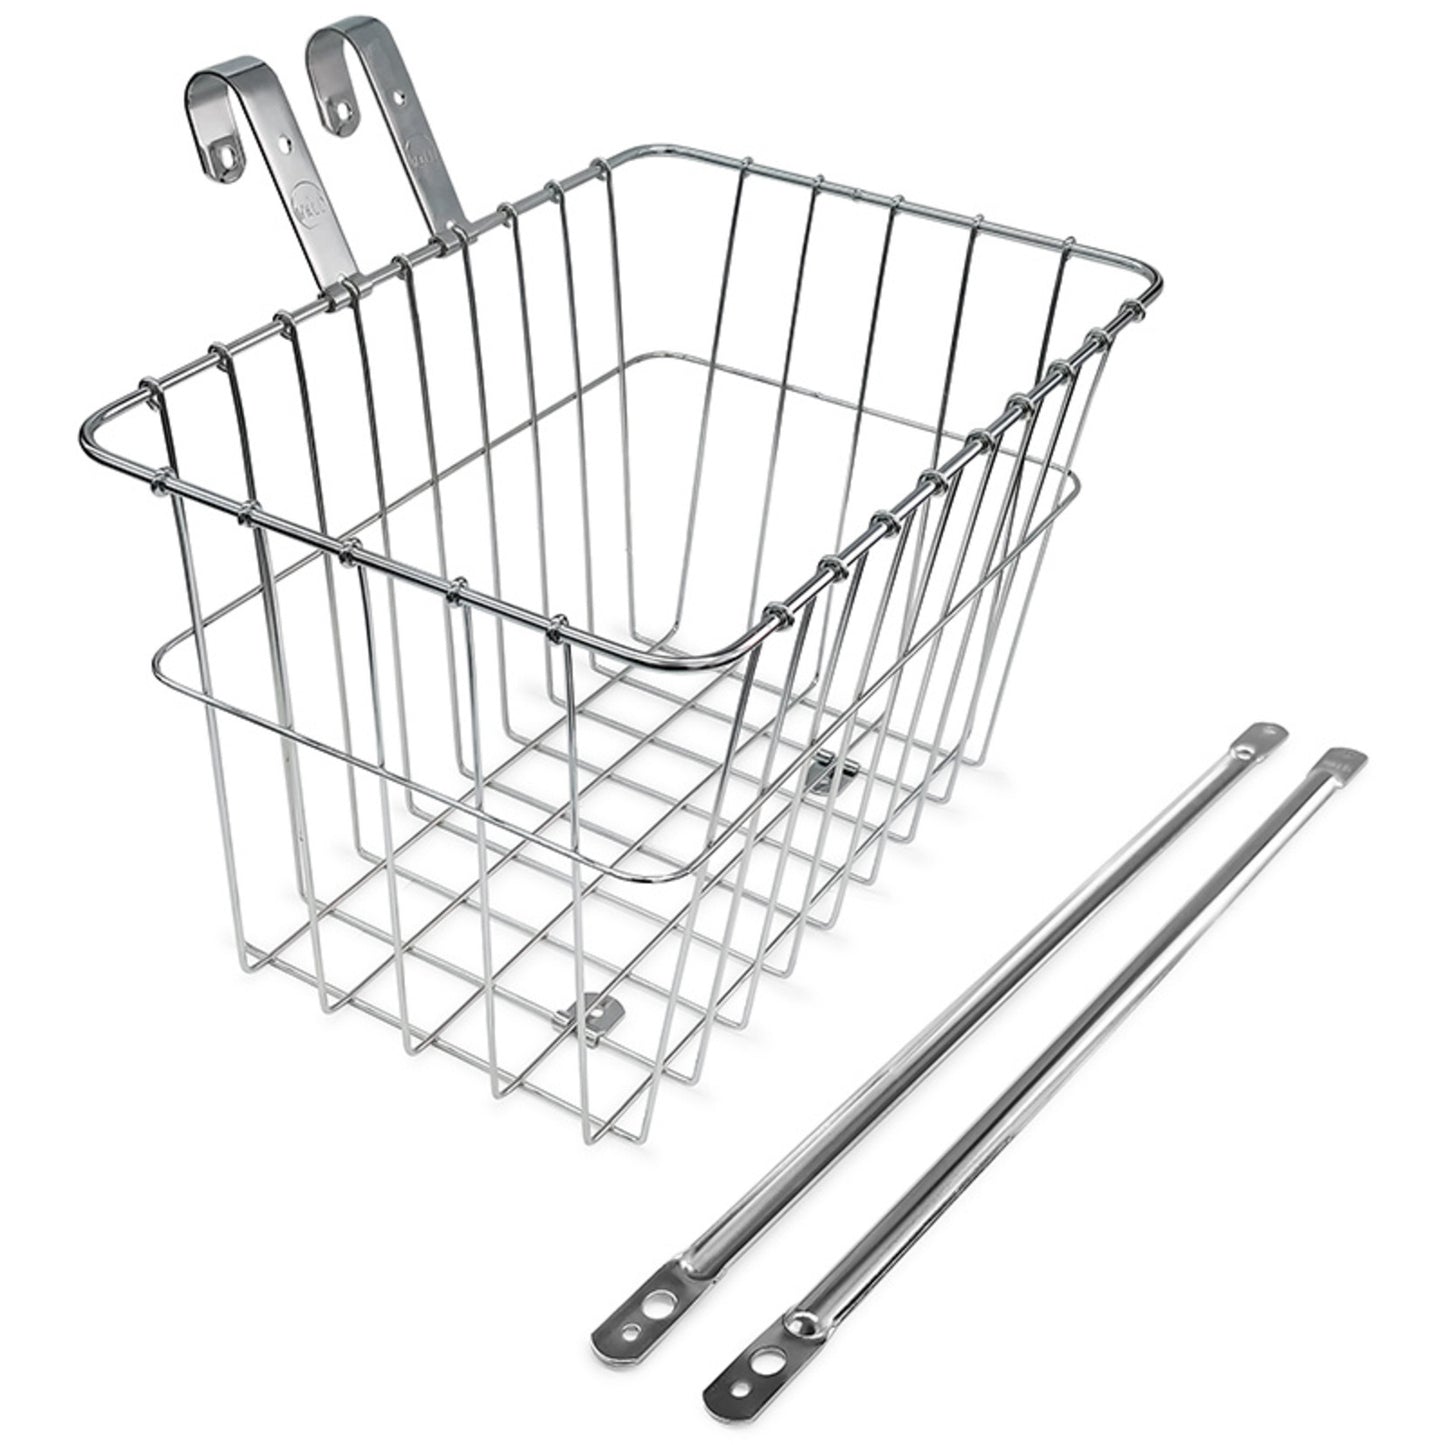 WALD #135 Front Basket in Chrome